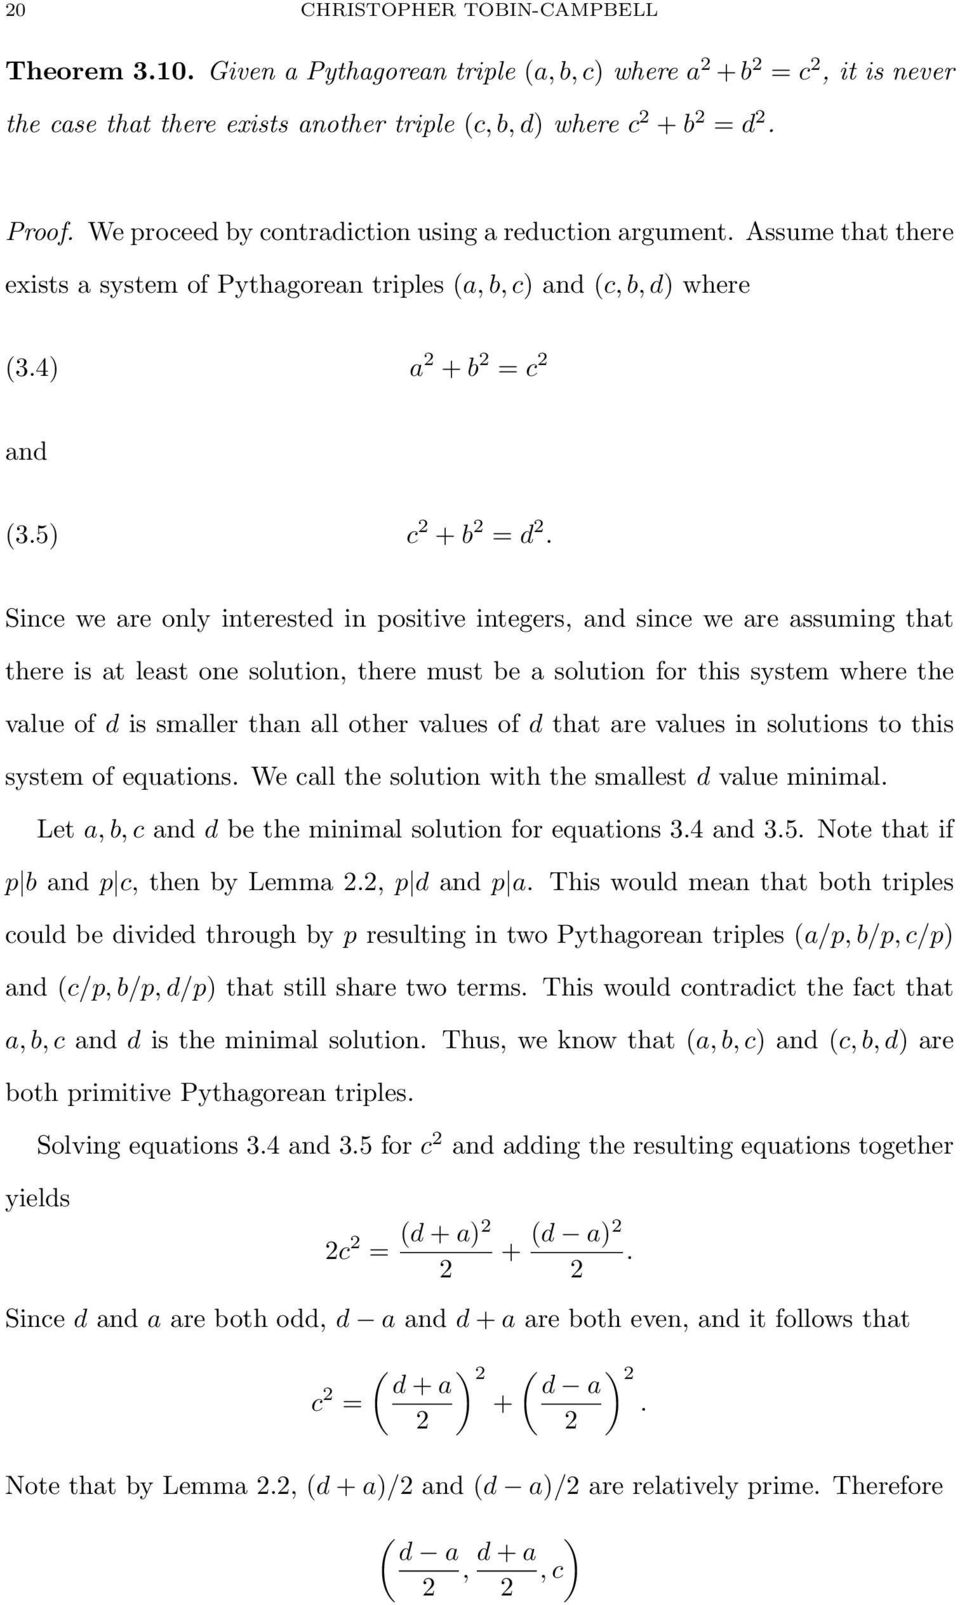 Since we are only interested in positive integers, and since we are assuming that there is at least one solution, there must be a solution for this system where the value of d is smaller than all